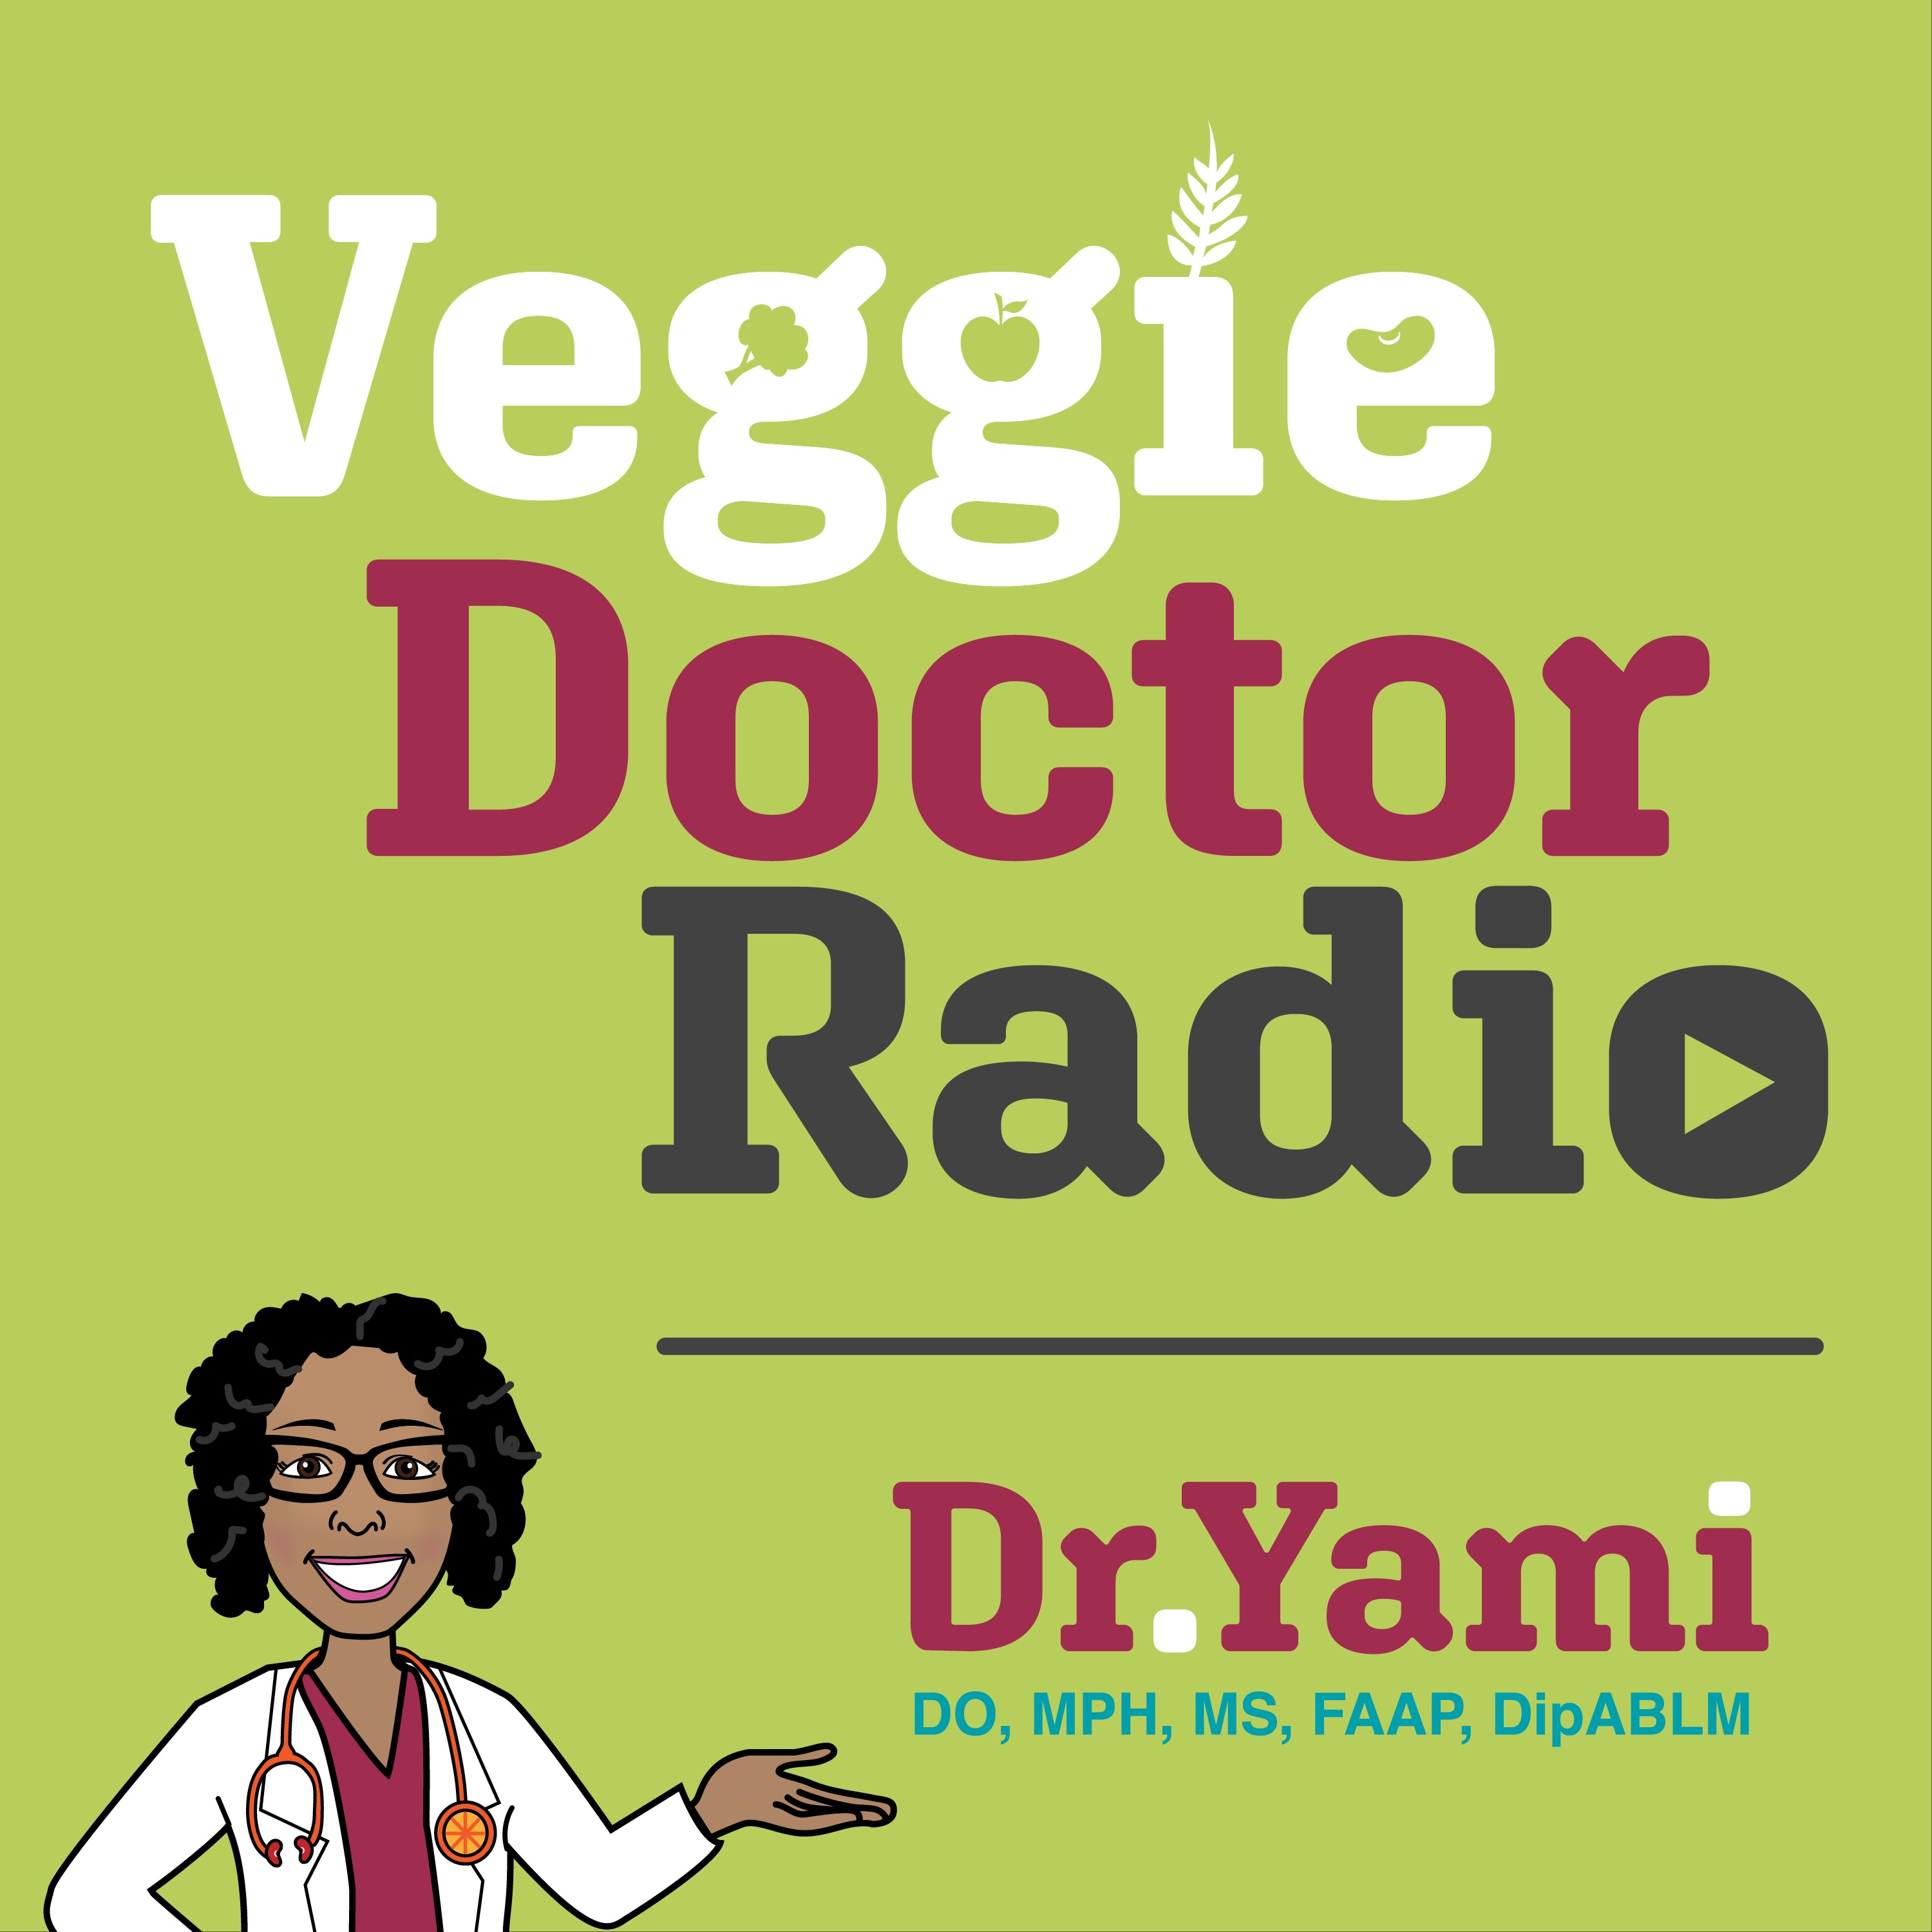 147: How this Plant-Based Doctor is Using Technology to Help You Achieve Health (Veggie Doctor Radio)